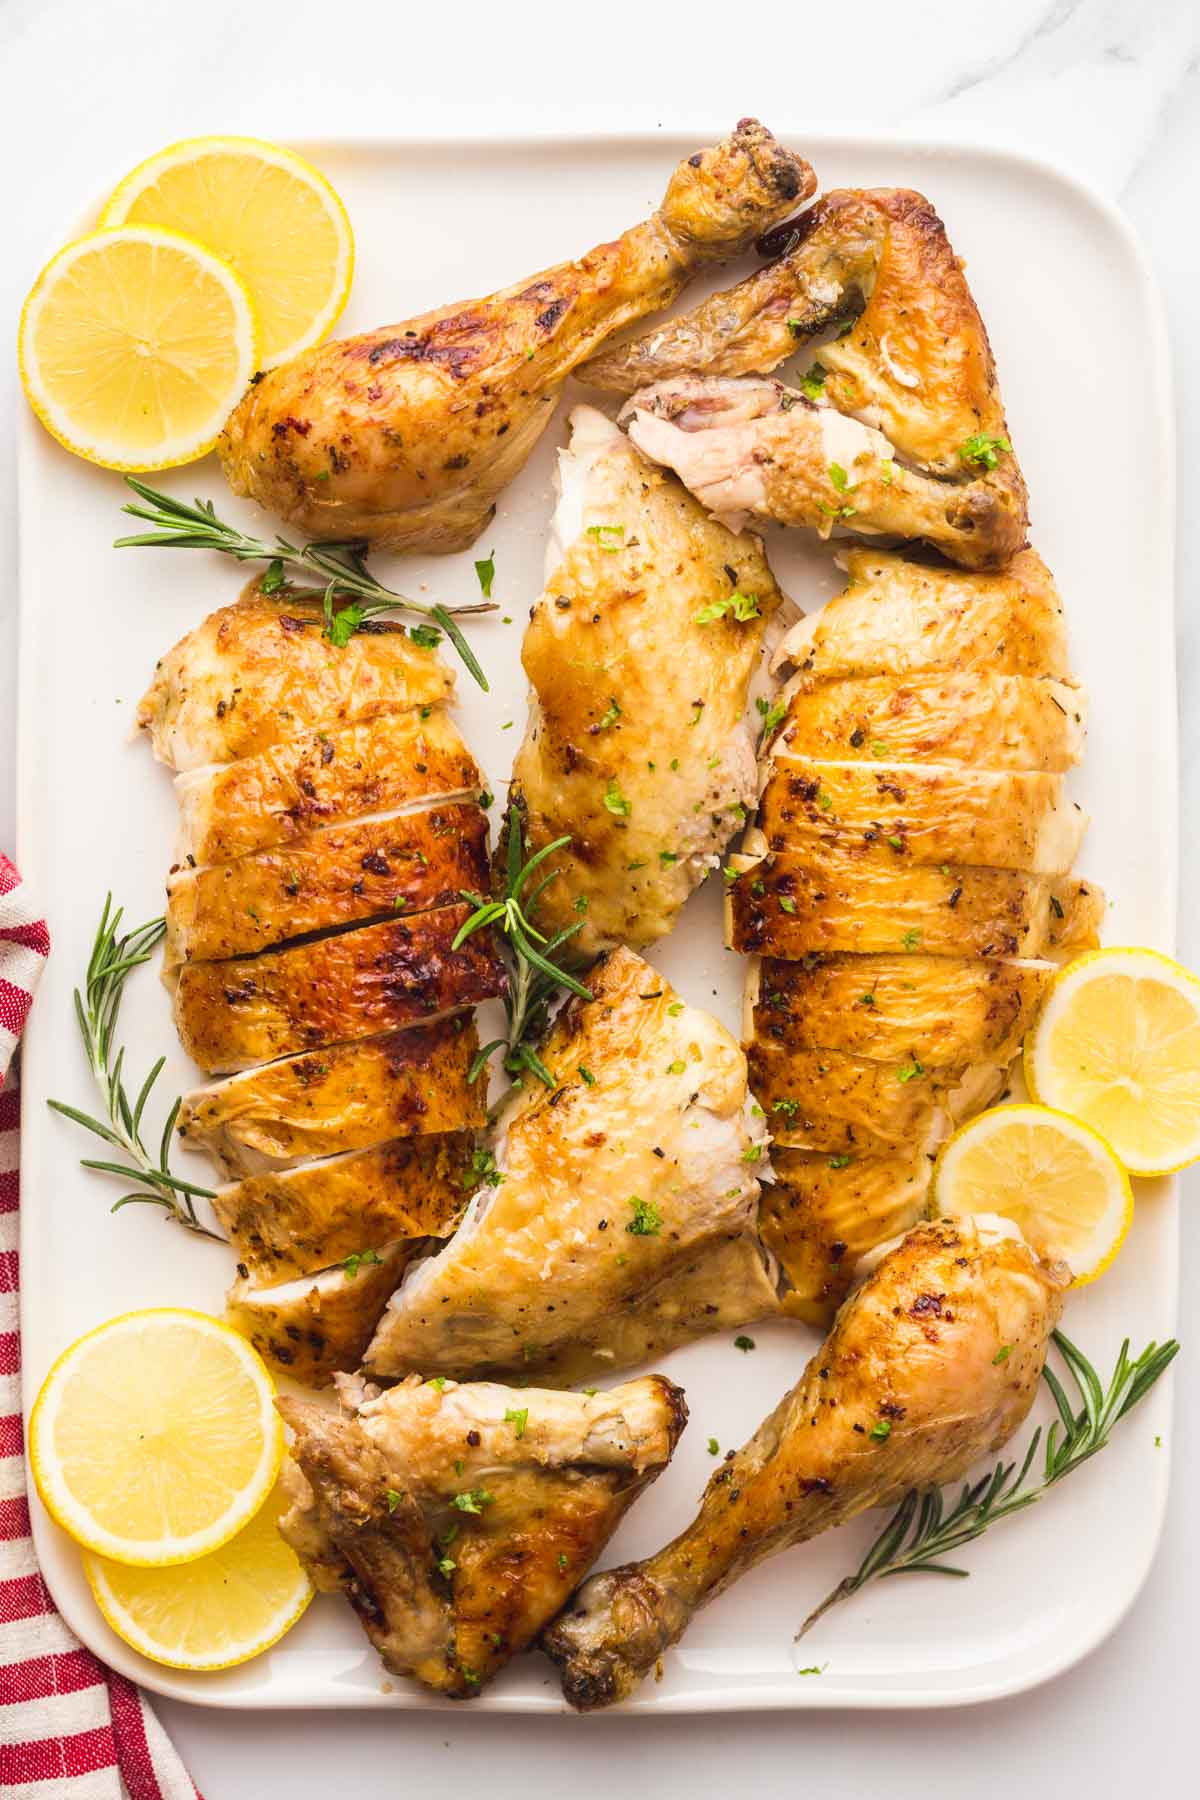 Carved chicken on a white platter with lemon slices and fresh rosemary sprigs.